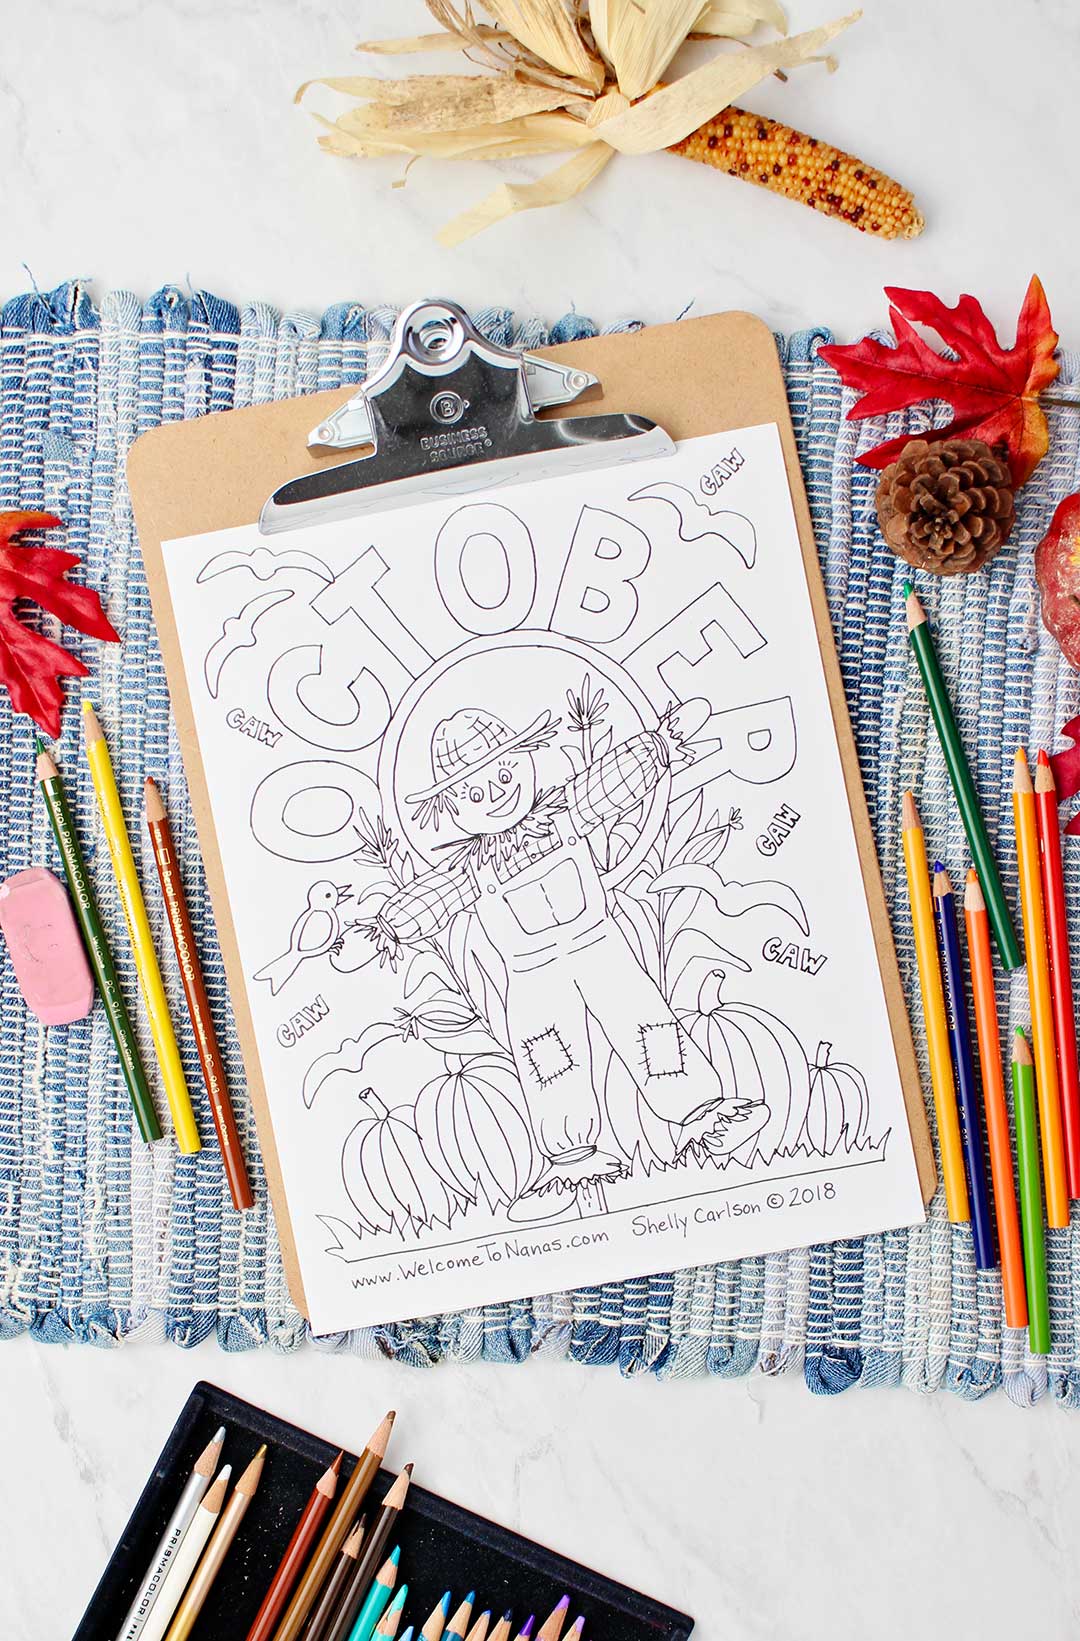 Uncolored October coloring page on blue woven placemat with colored pencils resting on it.